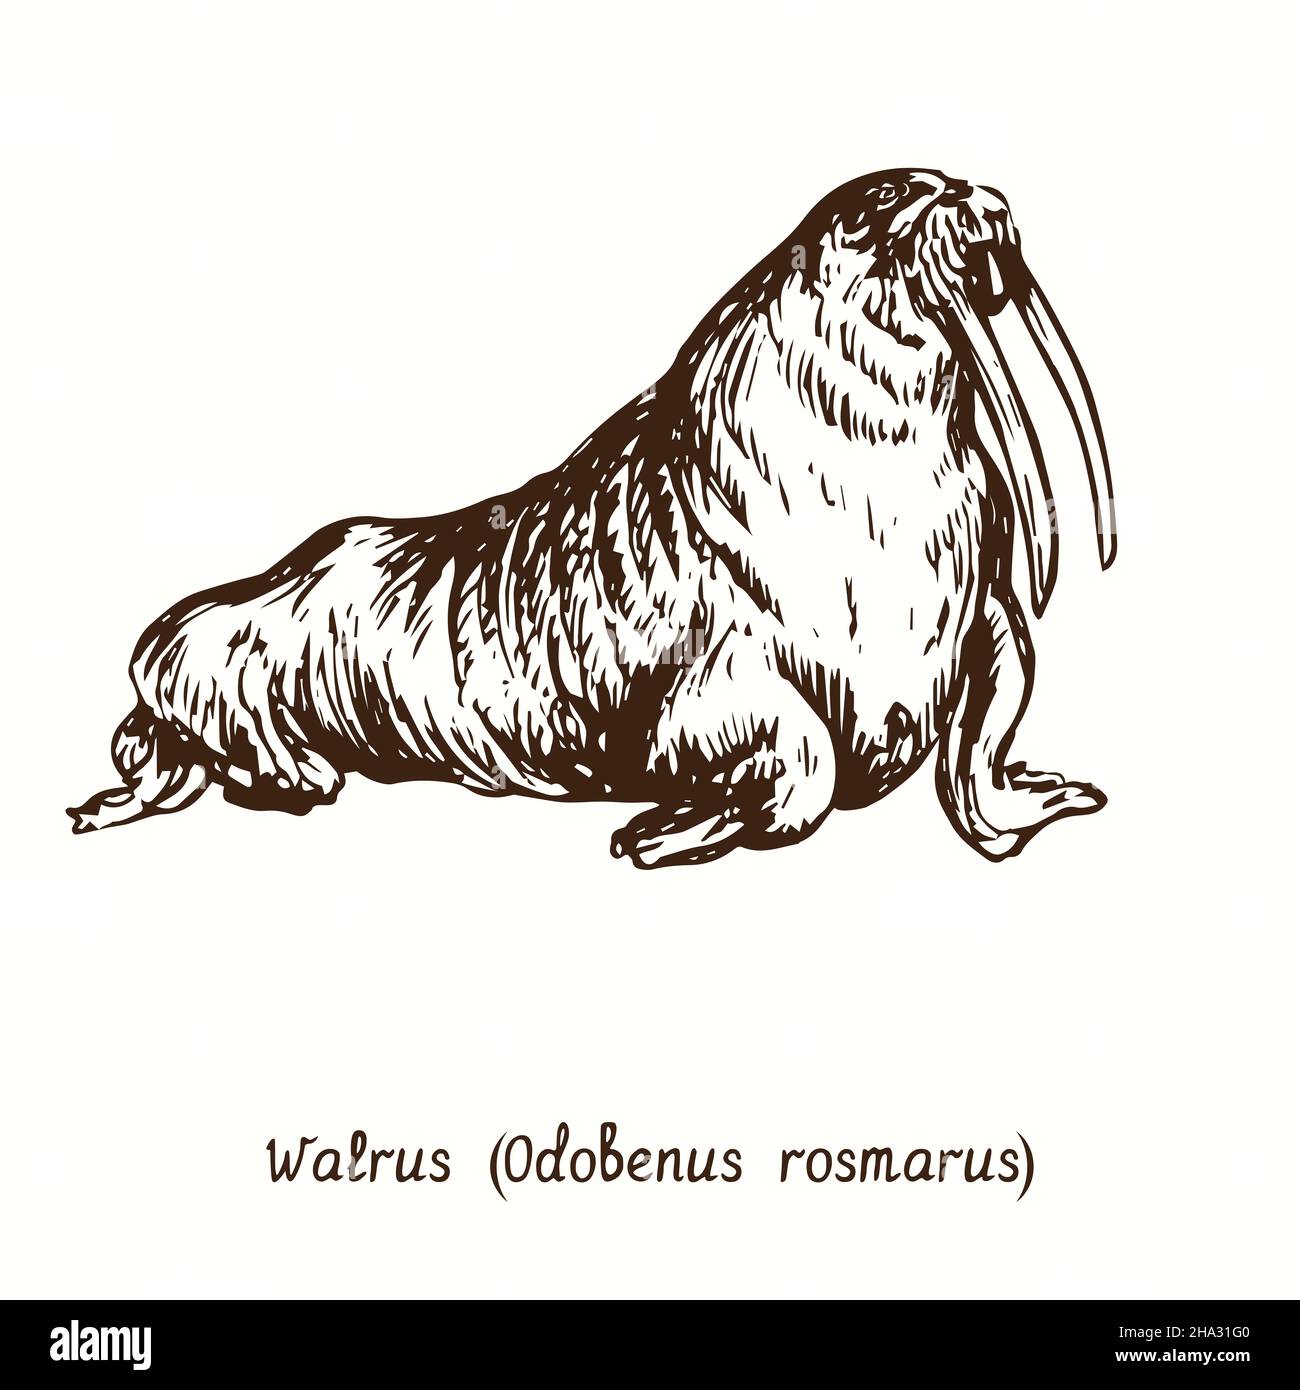 Walrus (Odobenus rosmarus) side view. Ink black and white doodle drawing in woodcut style. Stock Photo